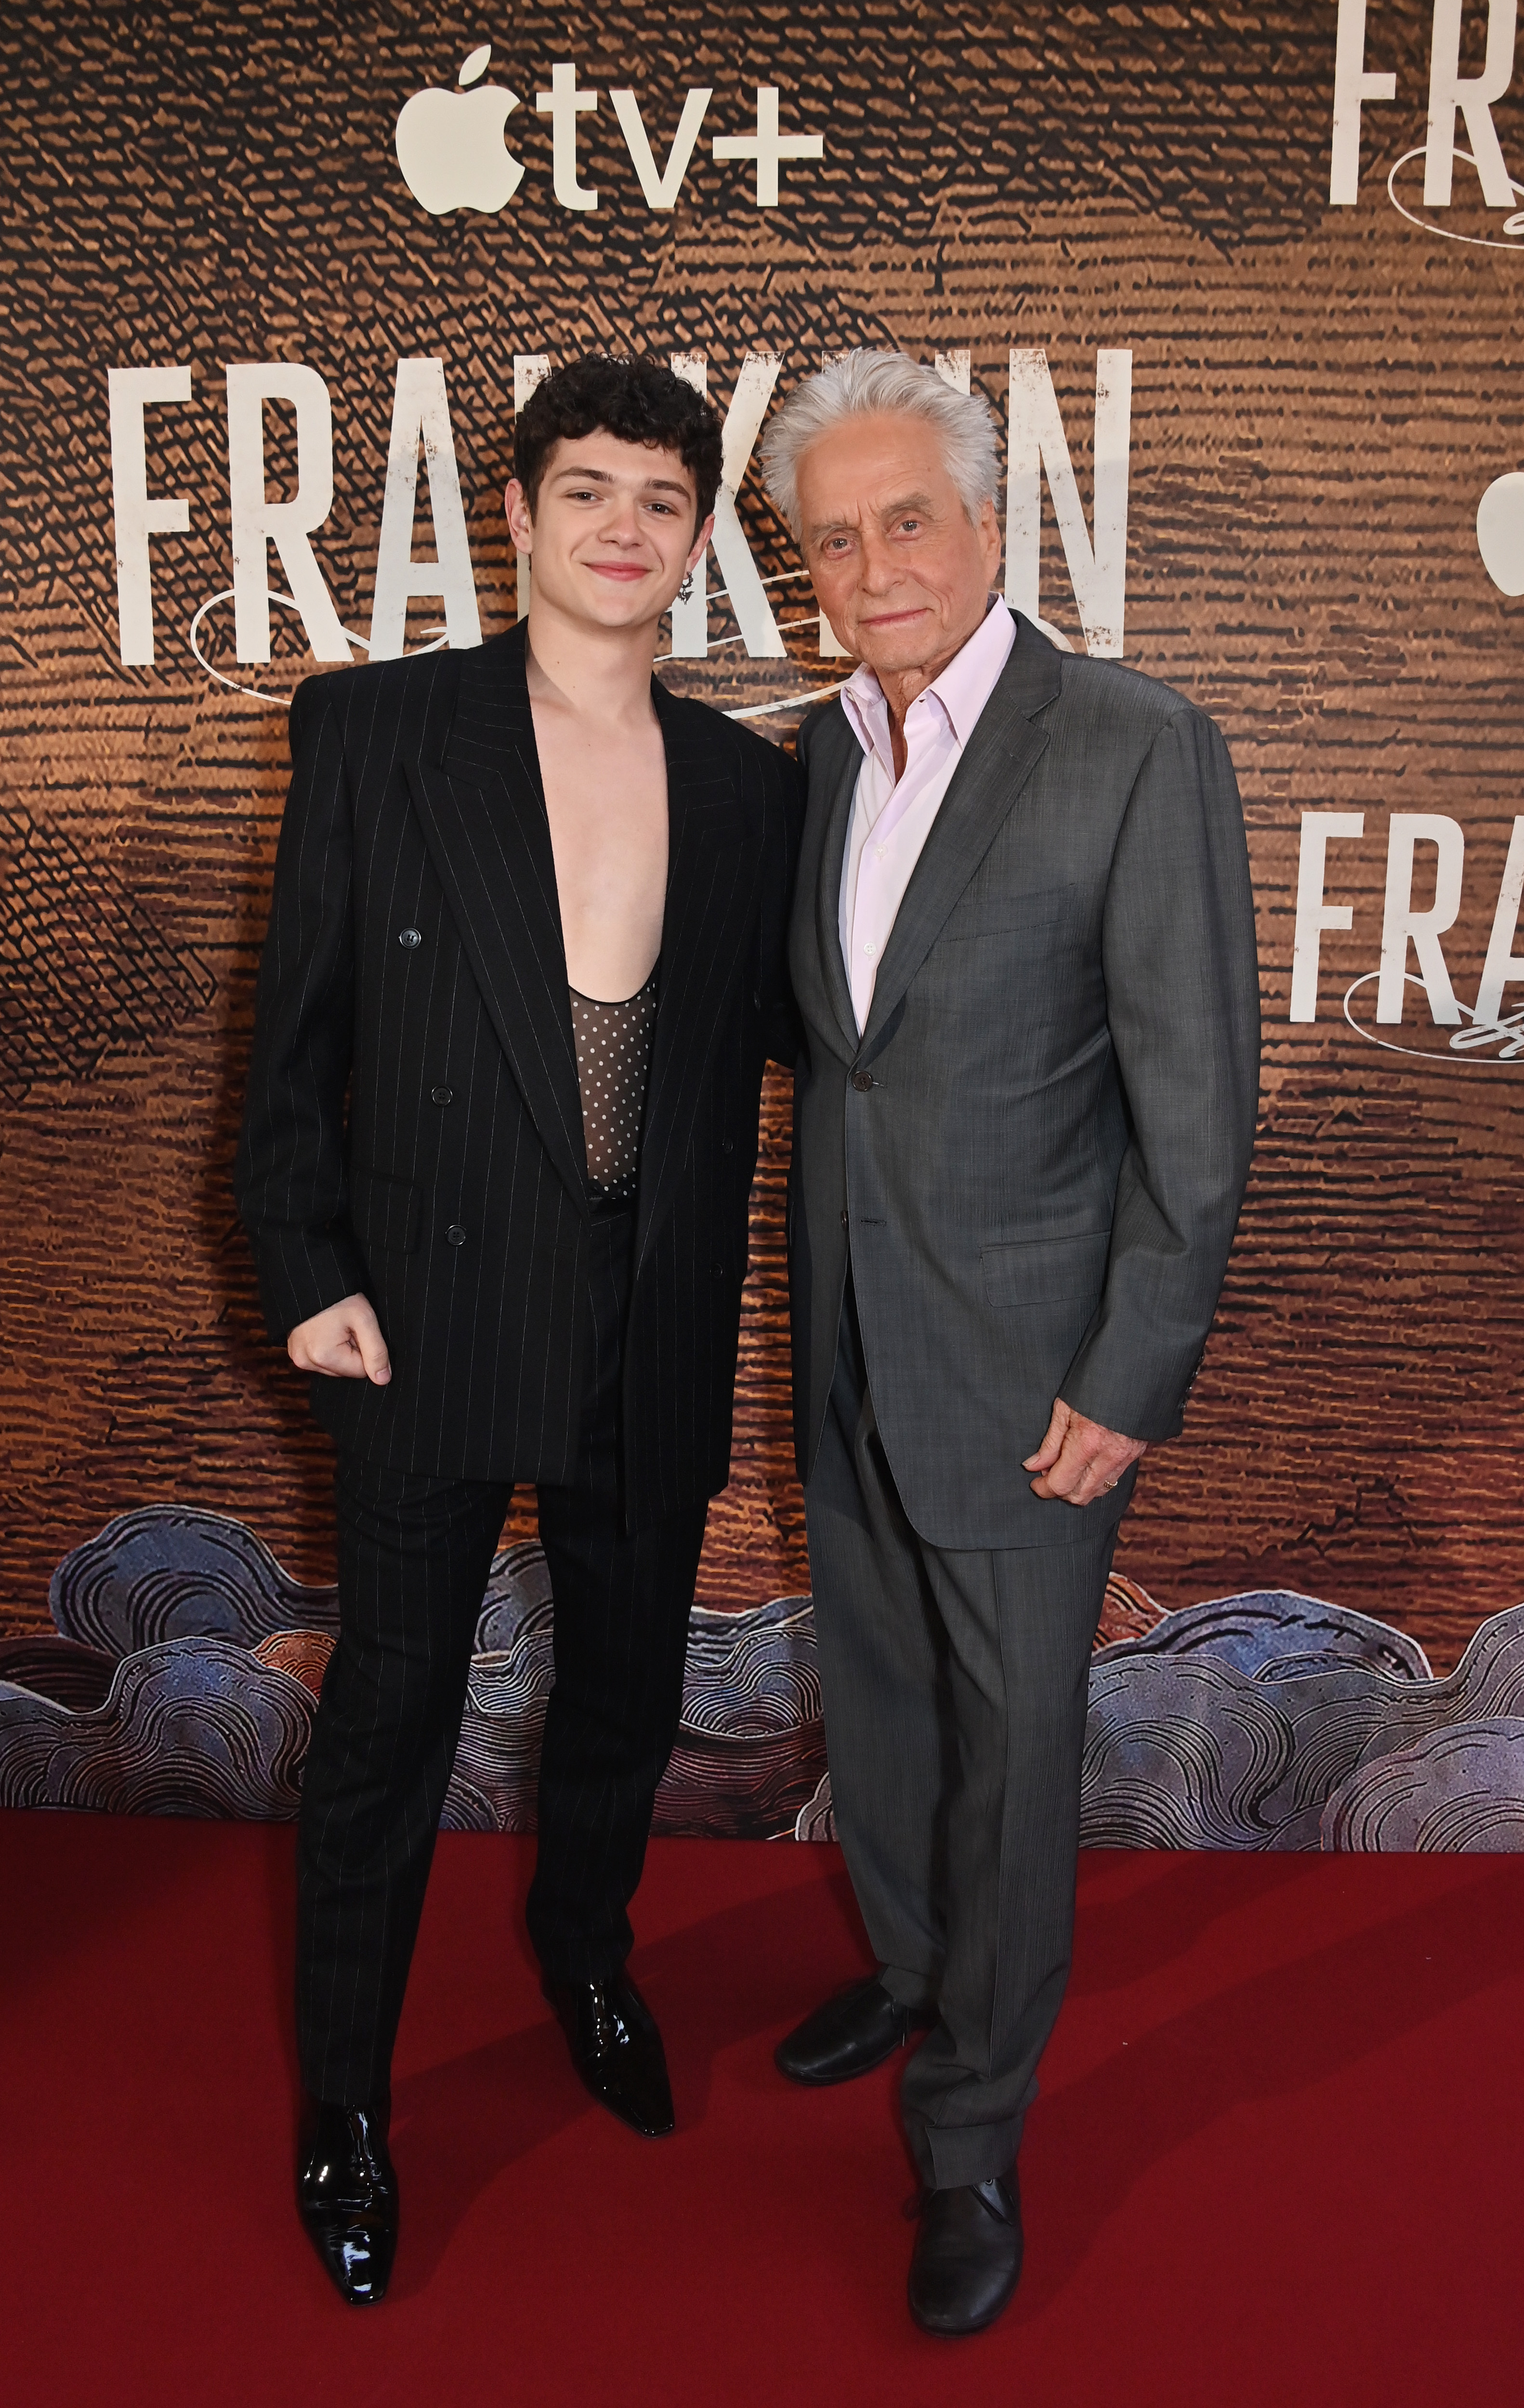 Michael Douglas and Noah Jupe at an event for Franklin (2024)